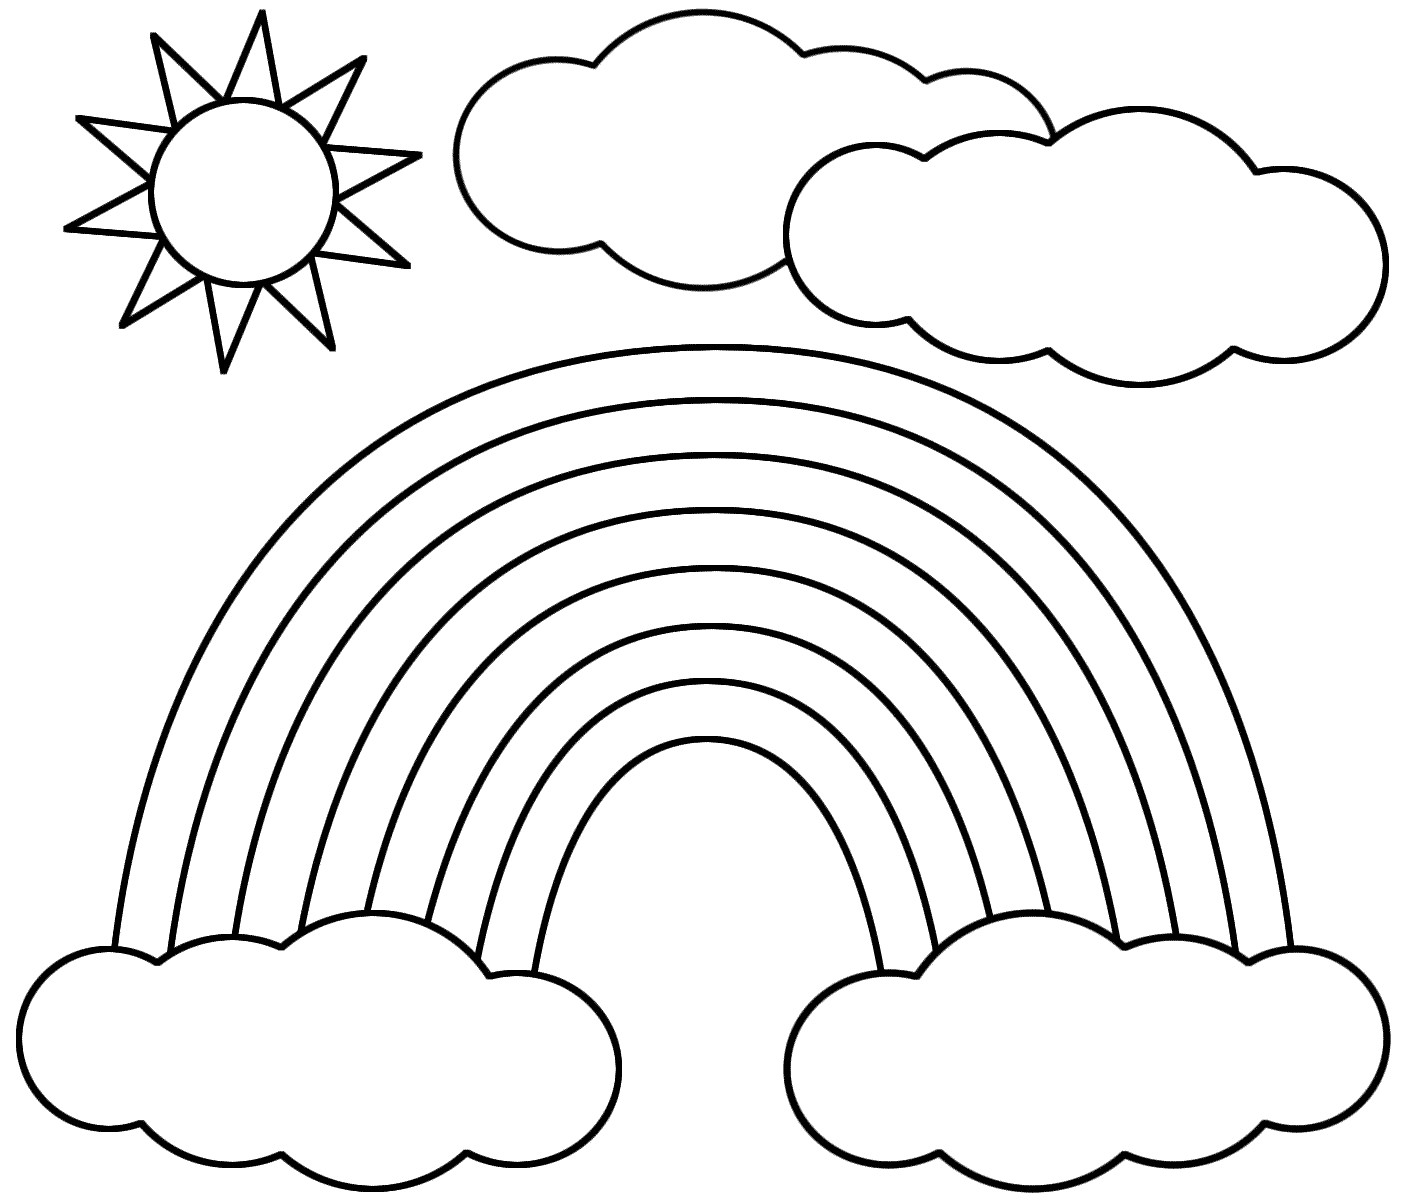 Top 25 Sun Coloring Pages for Kids - Home, Family, Style and Art Ideas